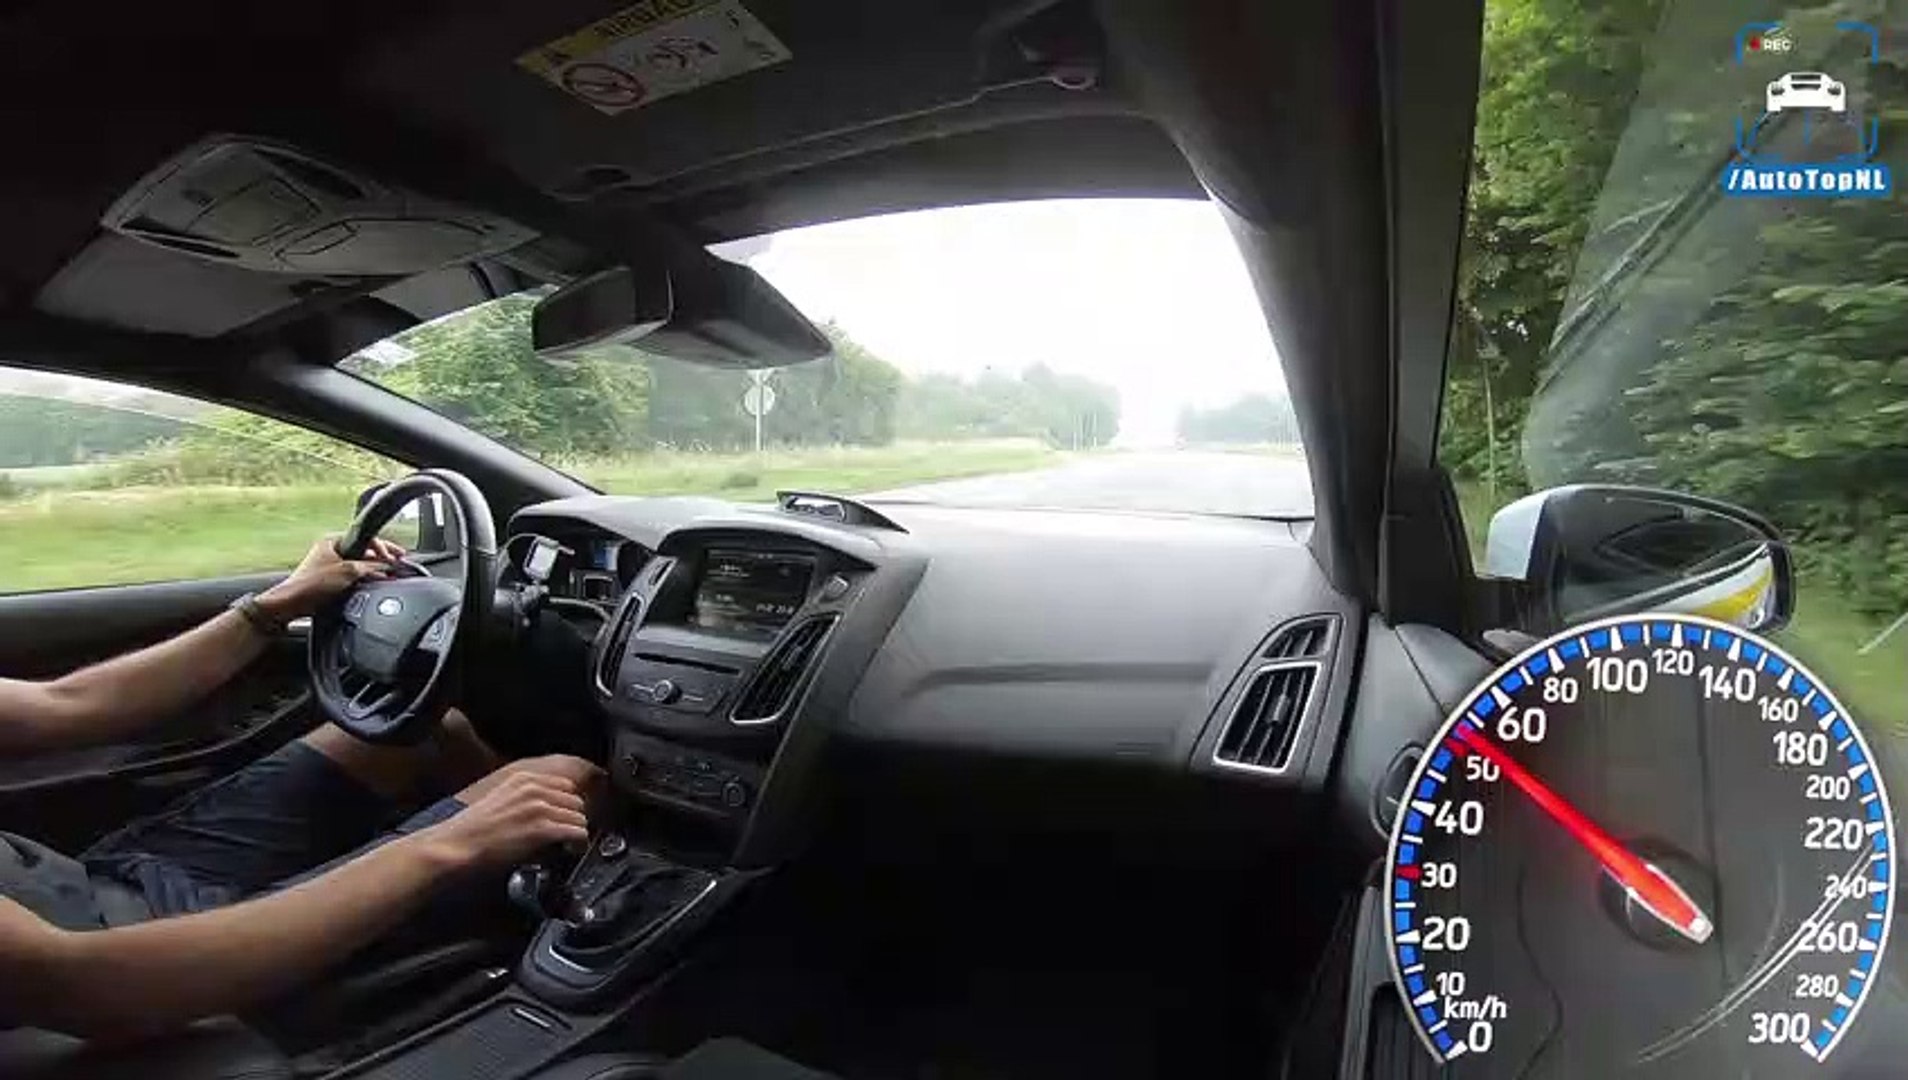 400HP FORD FOCUS RS MK3 270km/h on AUTOBAHN by AutoTopNL